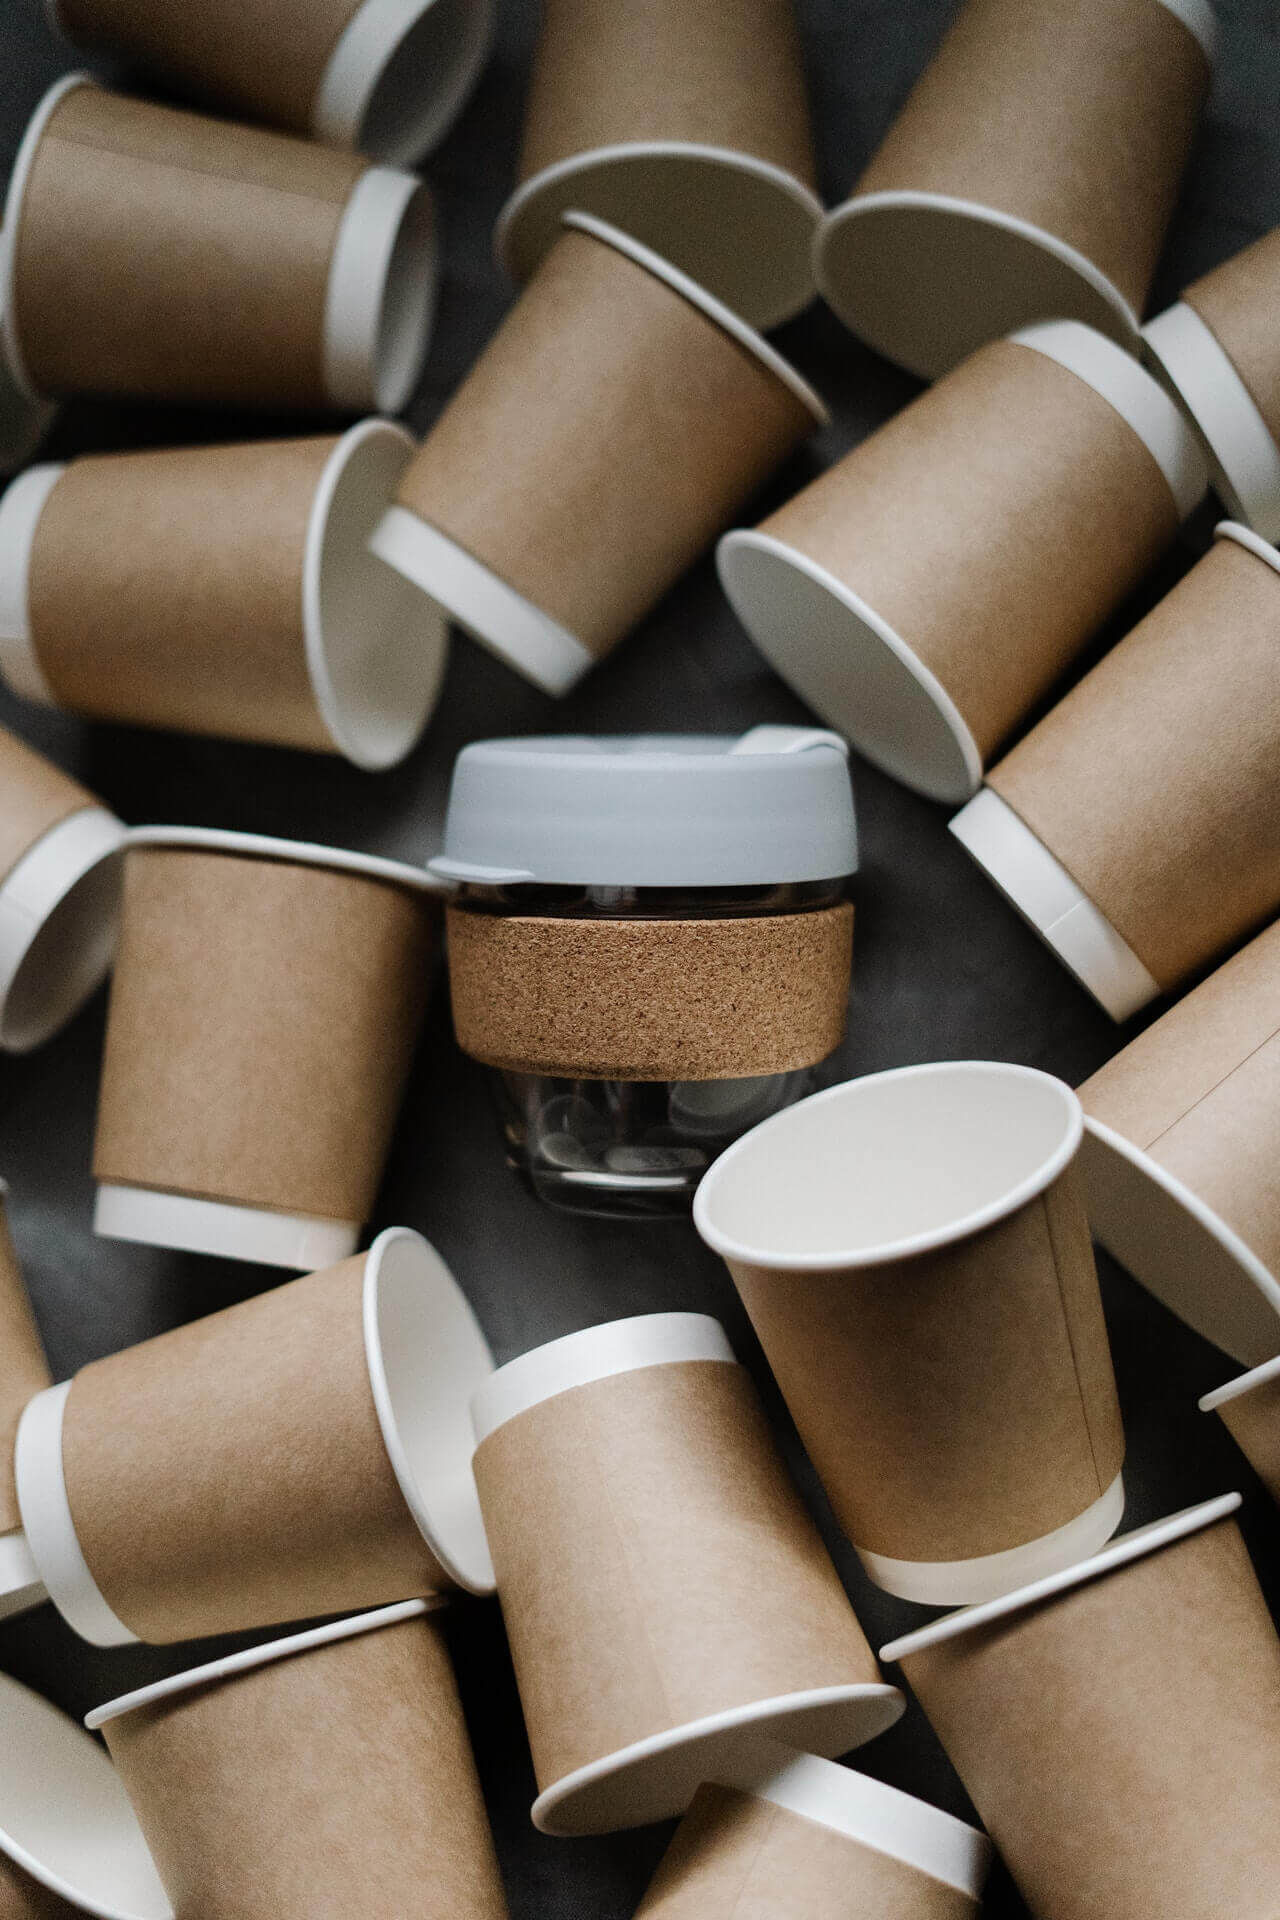 Reusable coffee cup surrounded by paper coffee cups